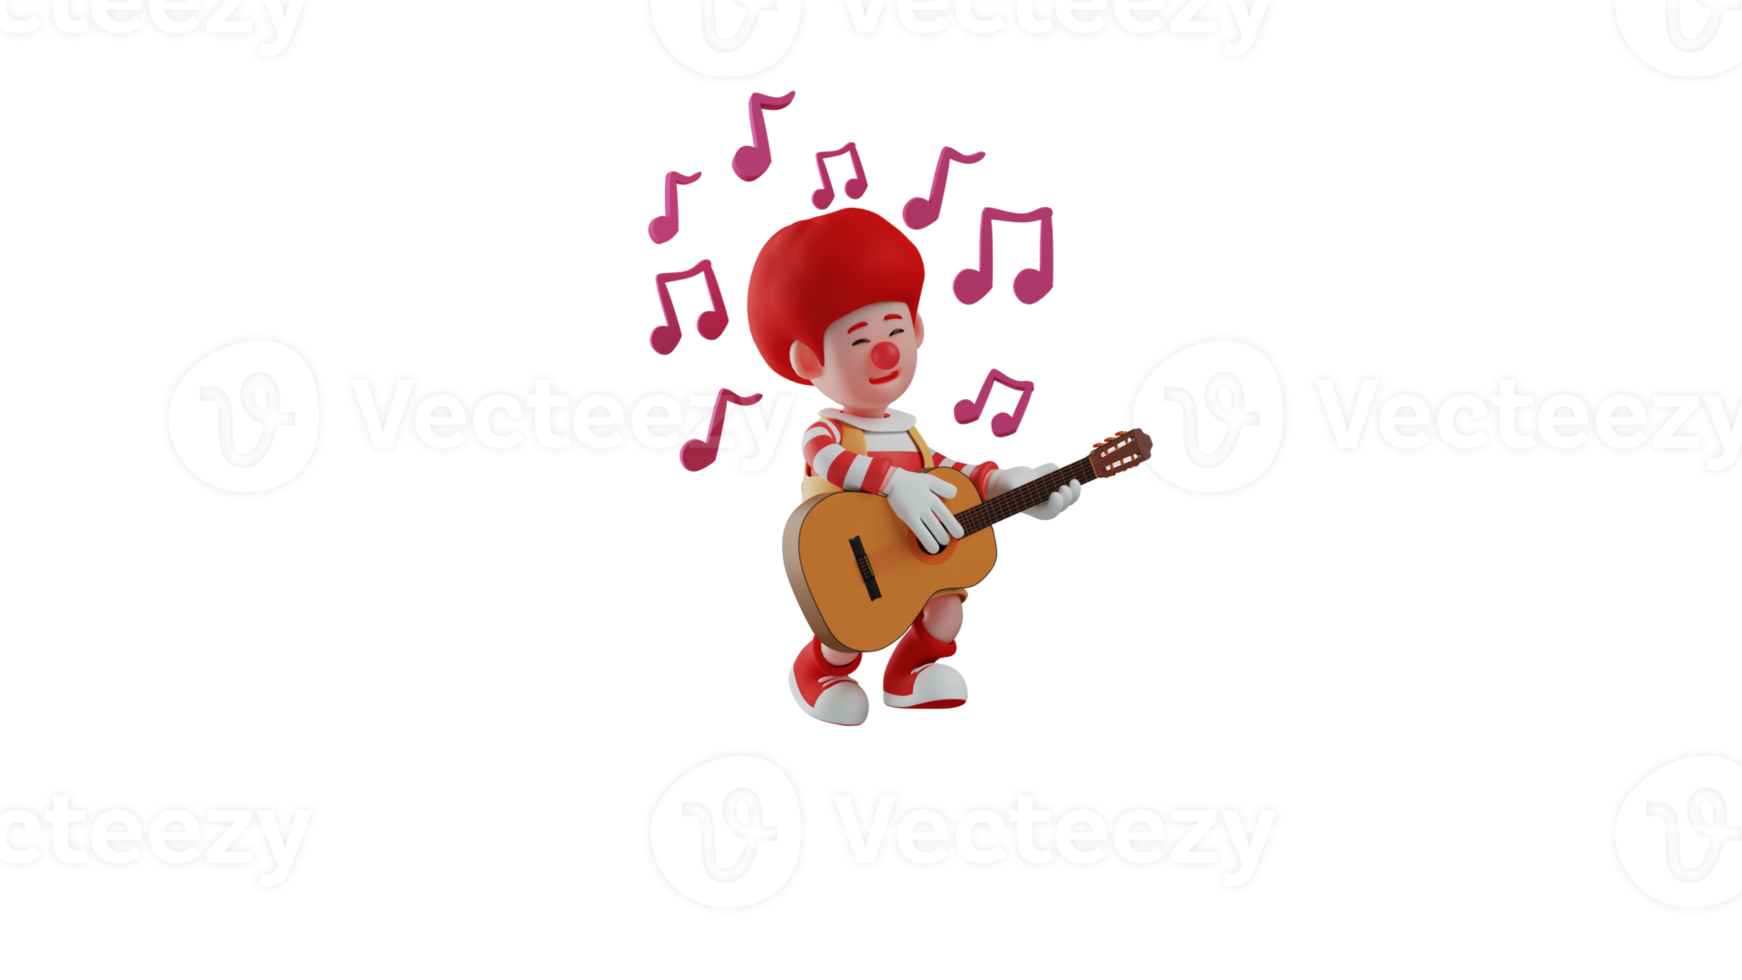 3D illustration. Talented clown 3D cartoon character. The clown plays the guitar to entertain the children. Clown playing music while singing. 3D cartoon character png